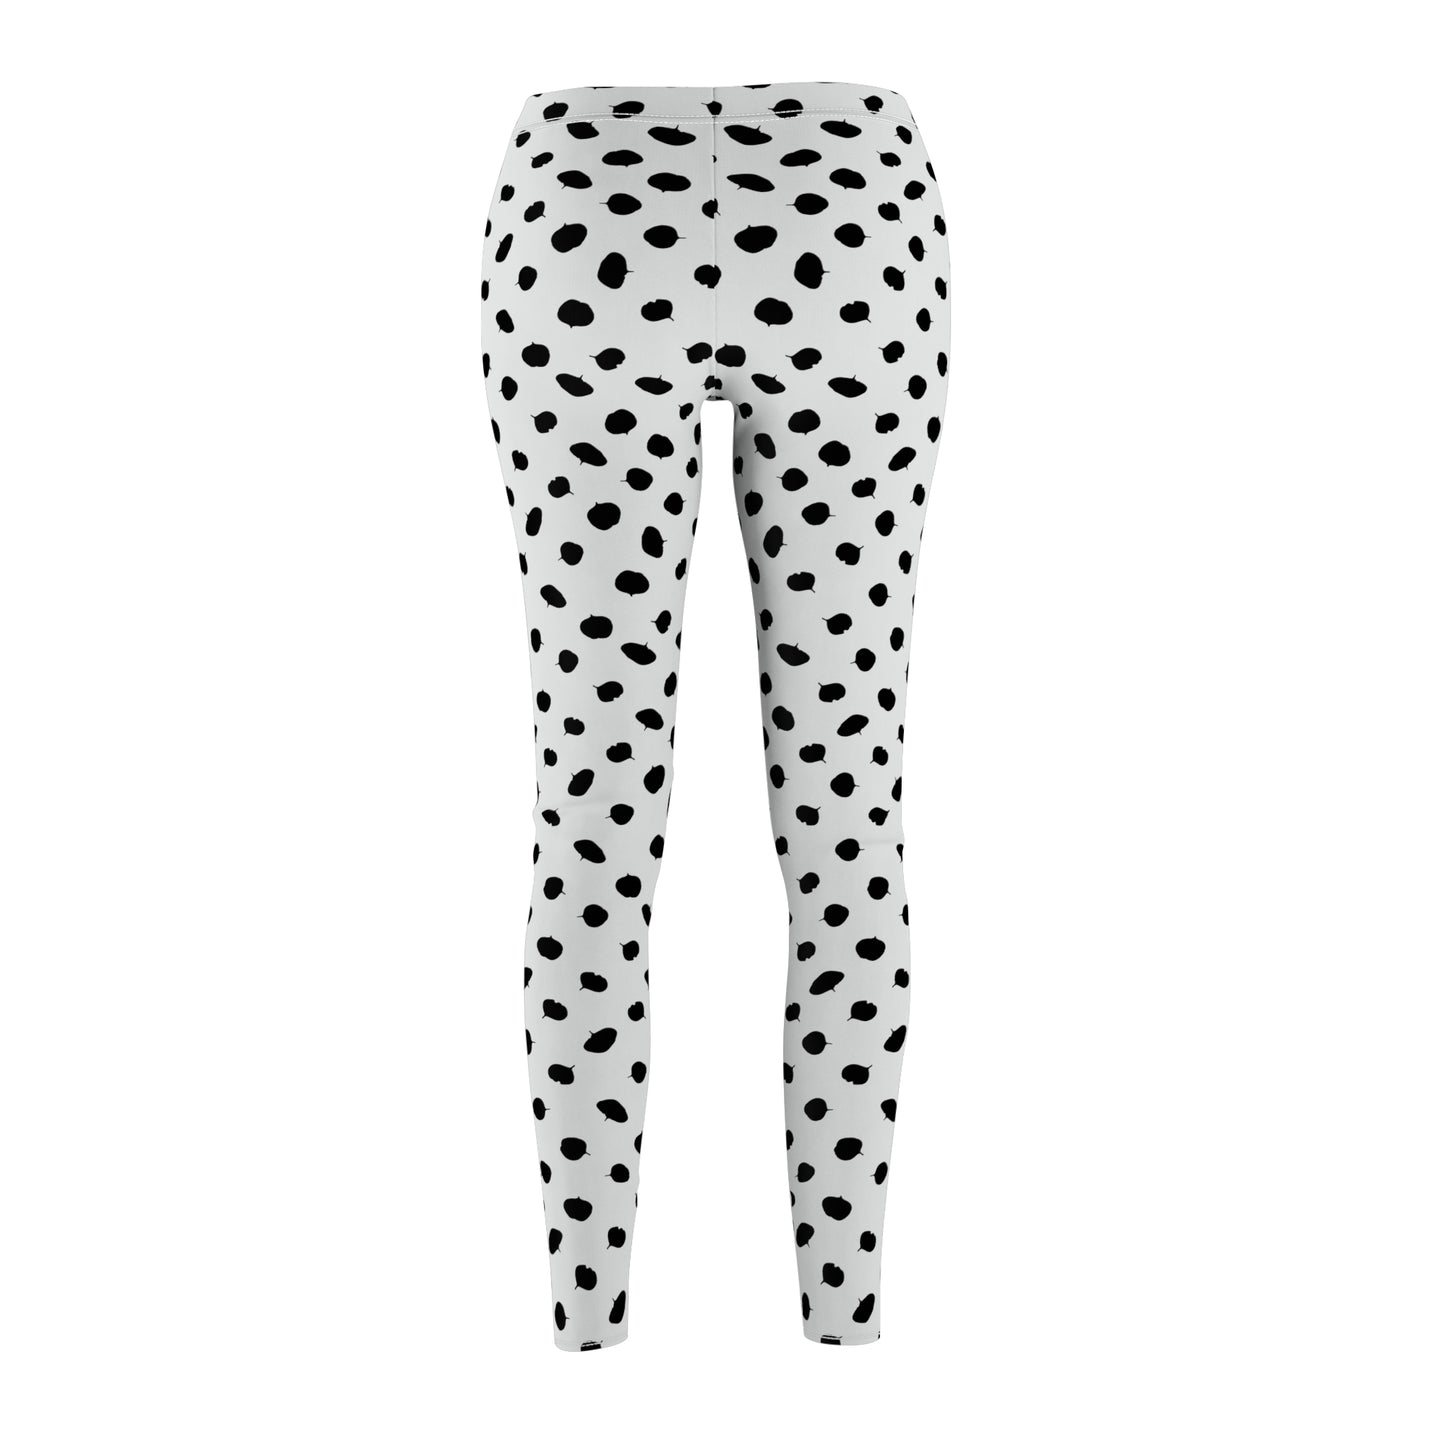 Black and White Floral Women's  Casual Leggings